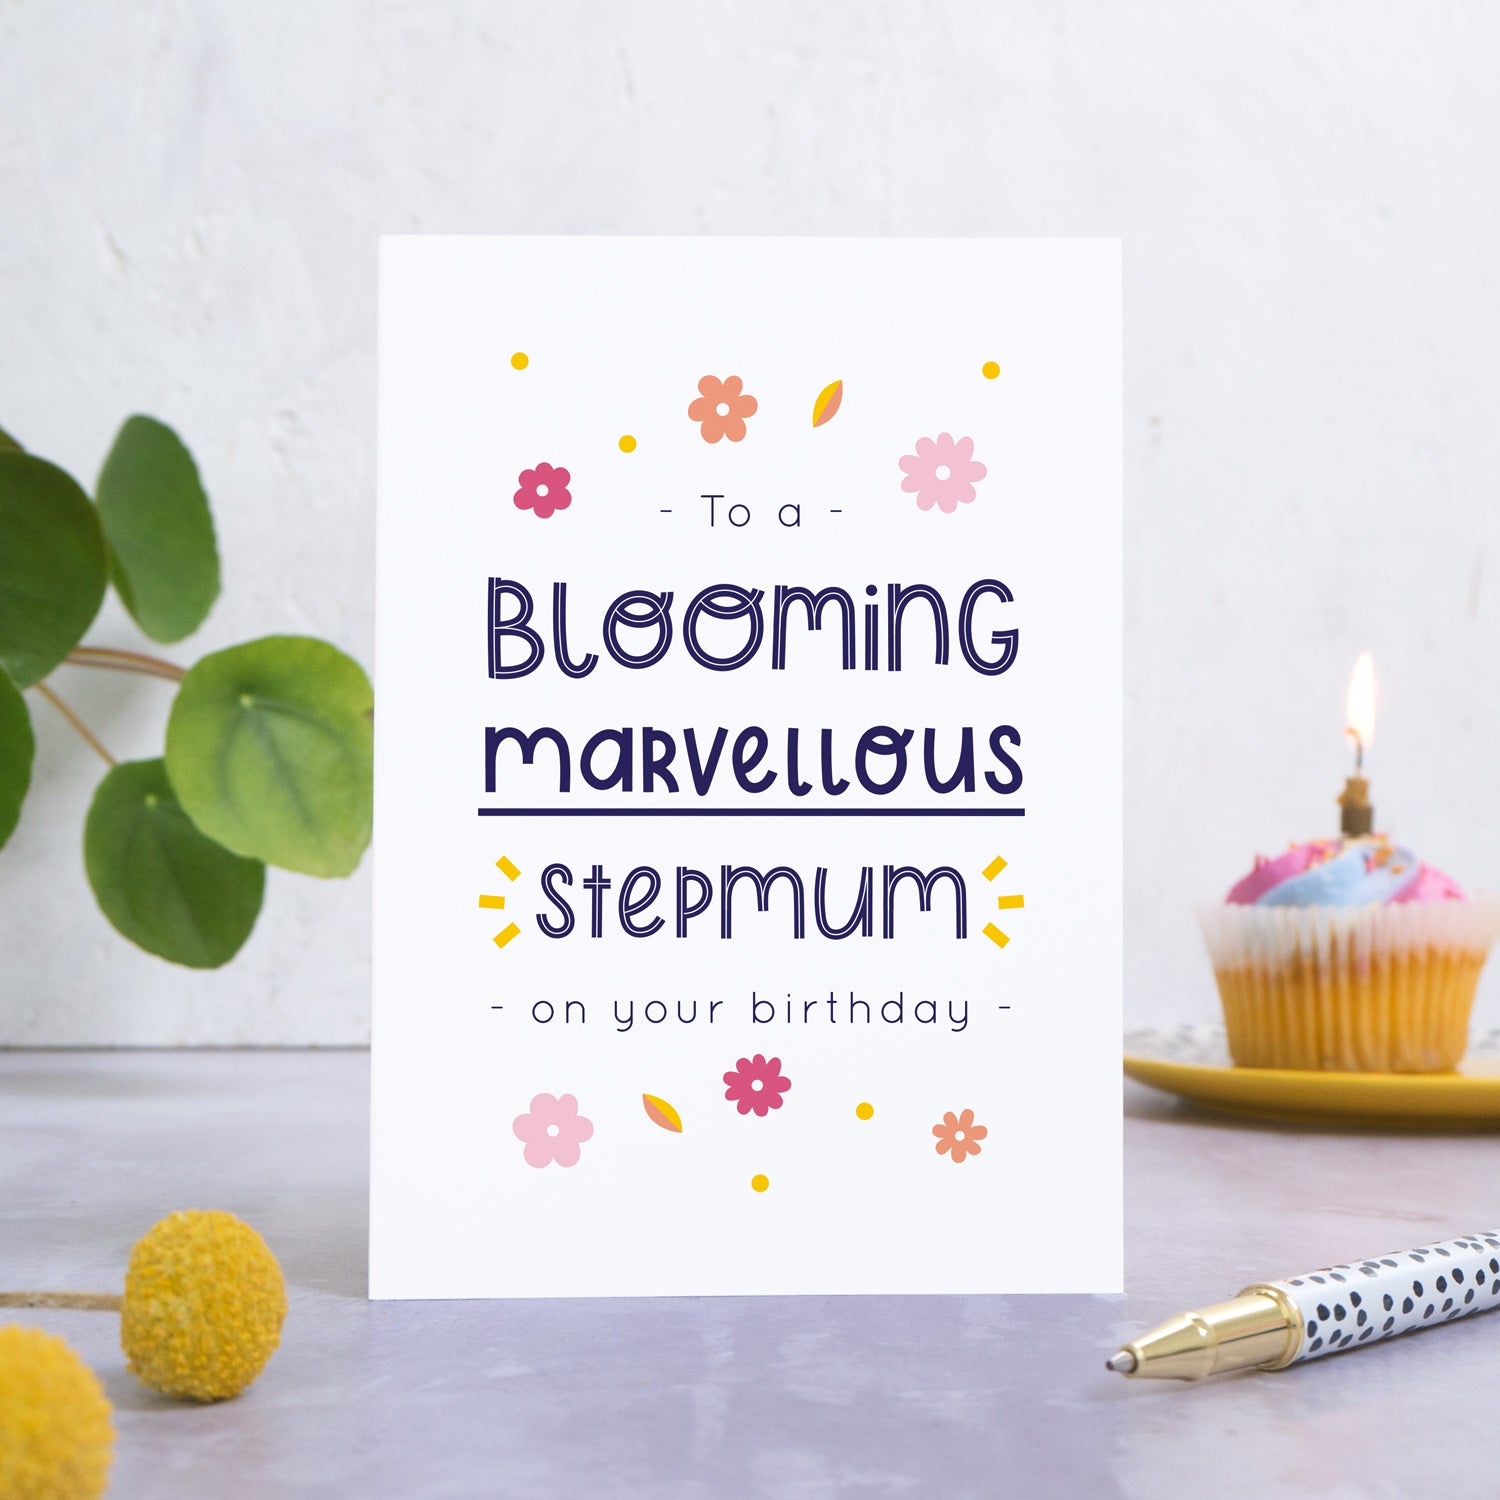 A blooming marvellous stepmum birthday card photographed standing in front of a white background. In the background is a plant and a birthday cupcake and with a candle. In the foreground are two yellow flowers and a spotty pen.